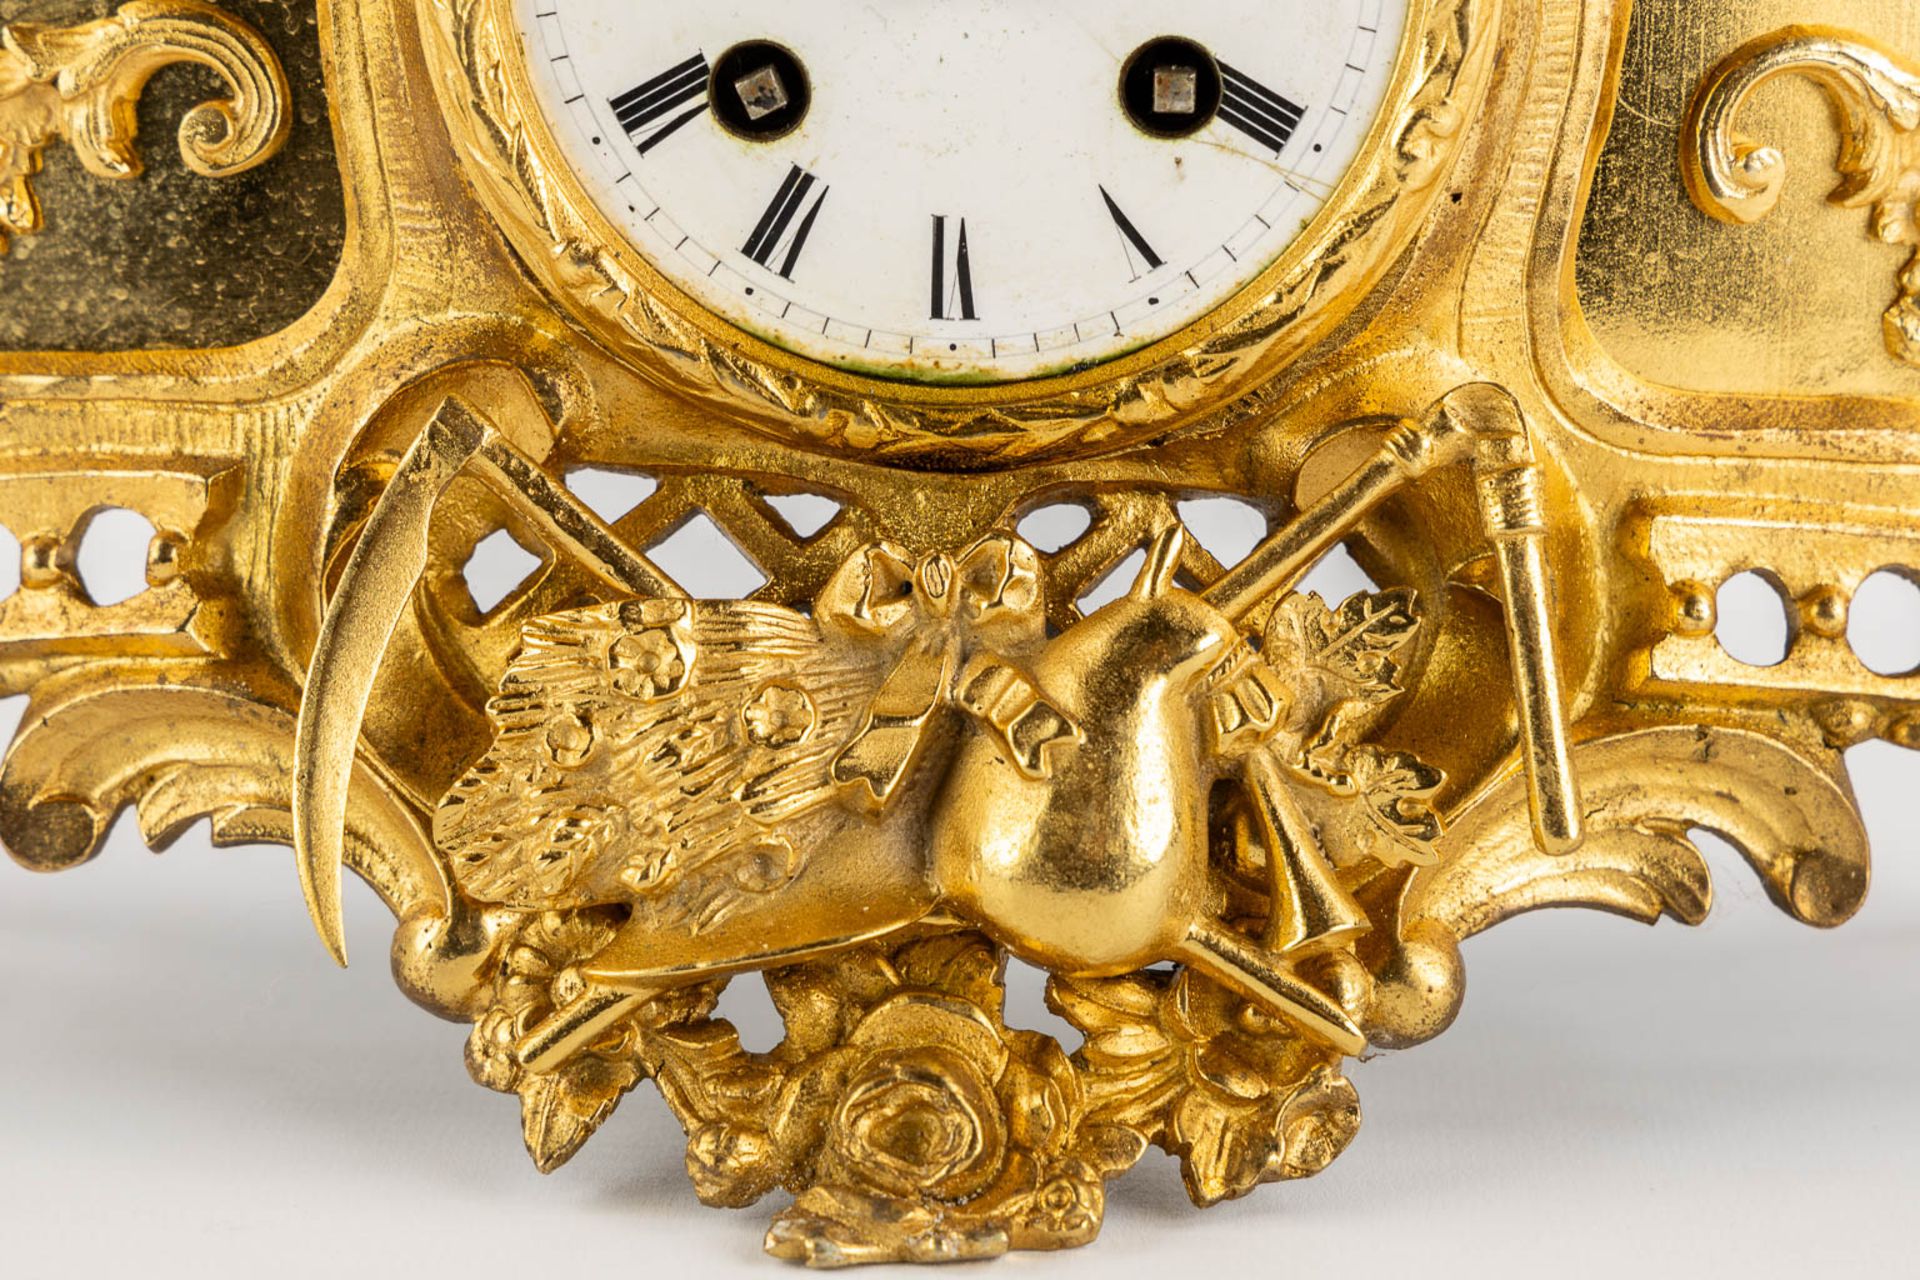 A mantle clock with a 'Horse Rider', gilt bronze. France, 19th C. (L:11,5 x W:38 x H:37 cm) - Image 12 of 12